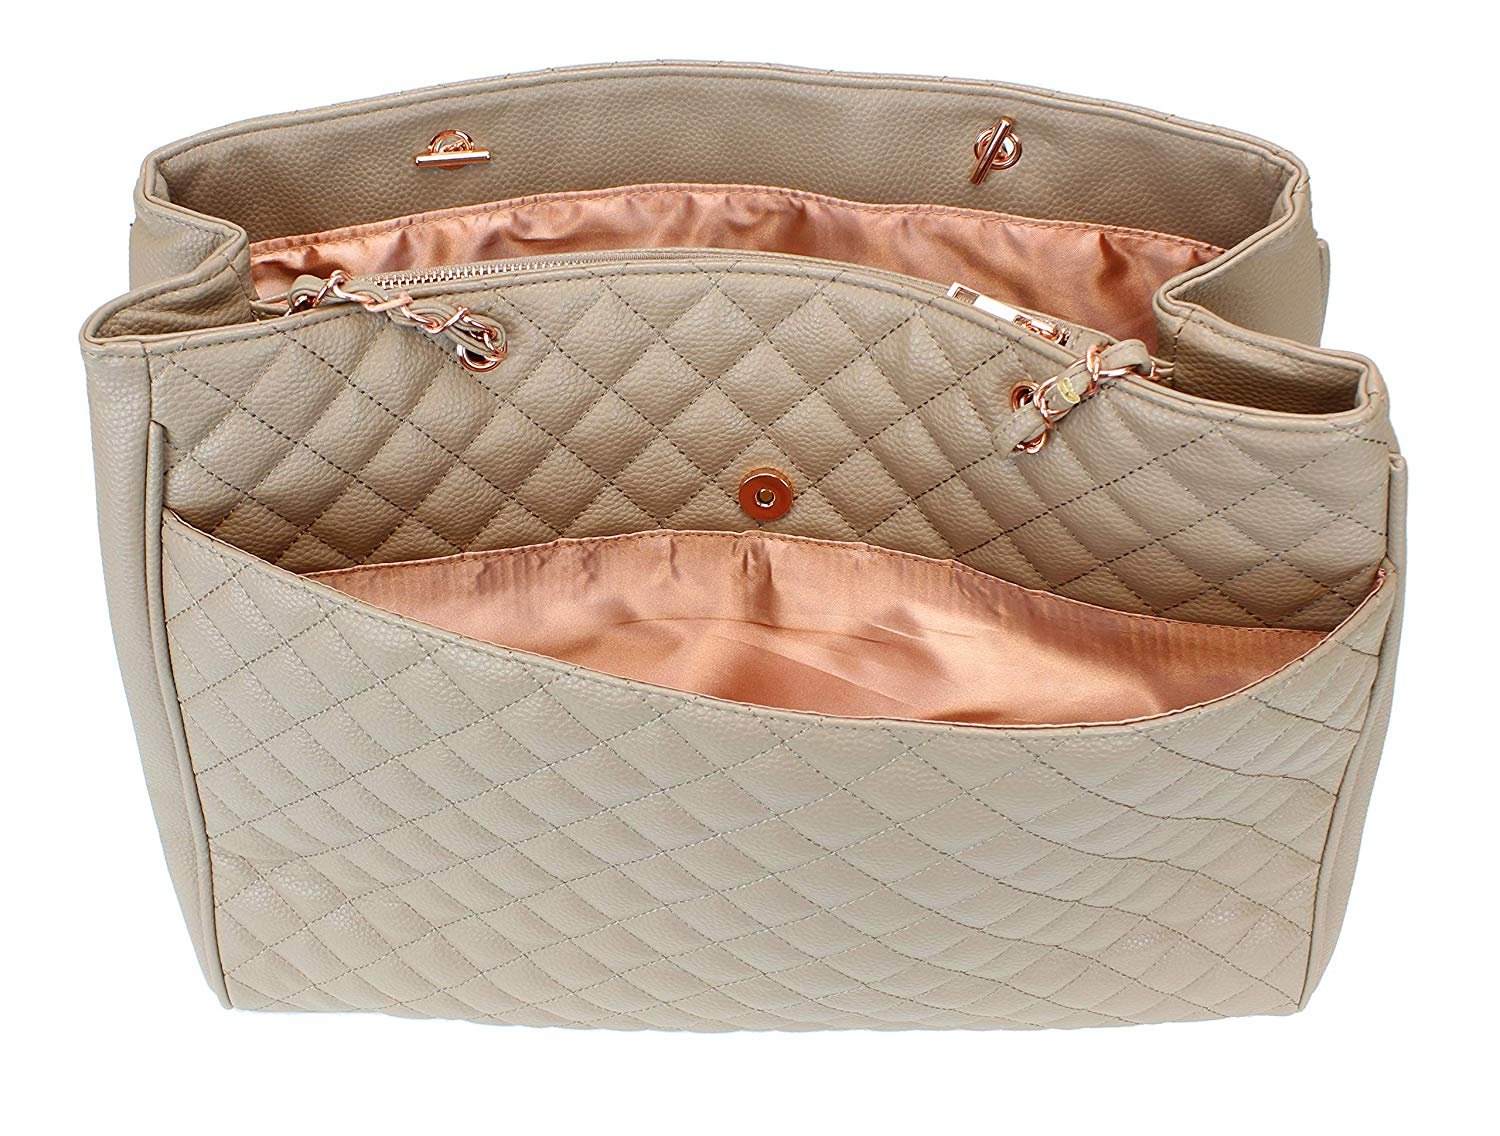 Women's Large Travel Tote Quilted Purse and Work Laptop Handbag - Rose Gold  Hardware With Satin Interior - Light Pink 